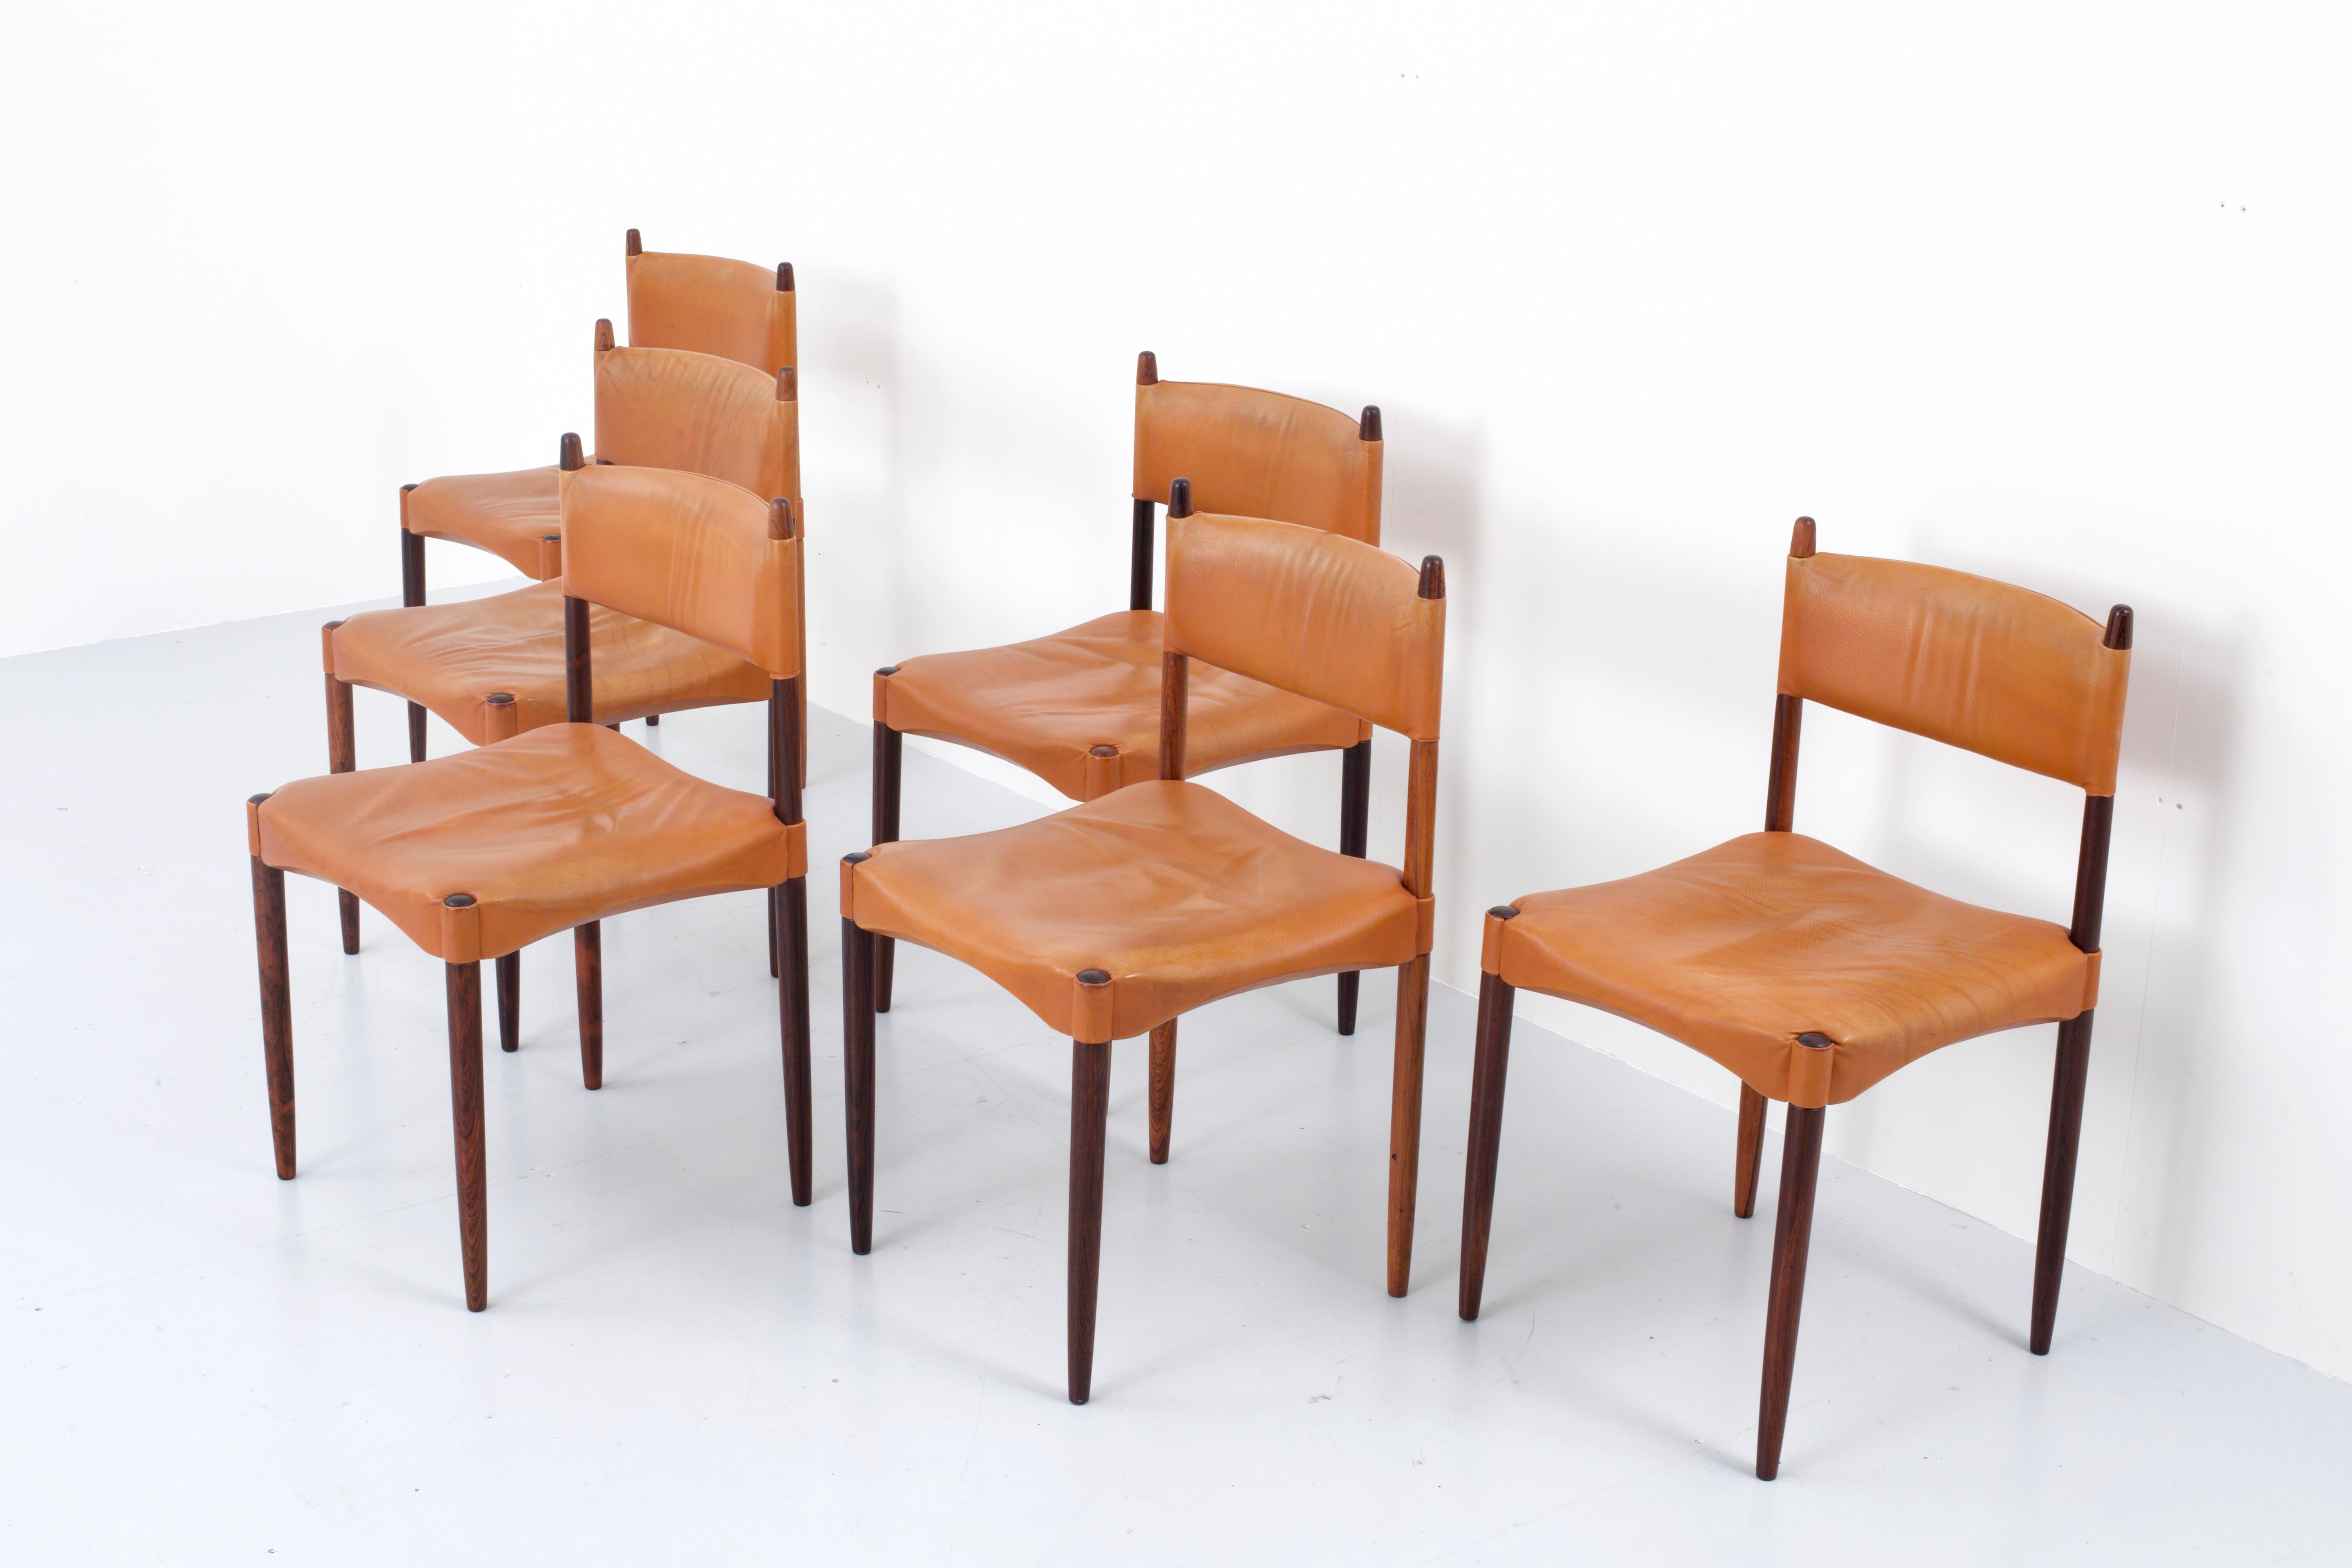 Danish Set of 6 Dining Chairs by Anders Jensen in Rosewood and Leather, Denmark, 1960's For Sale